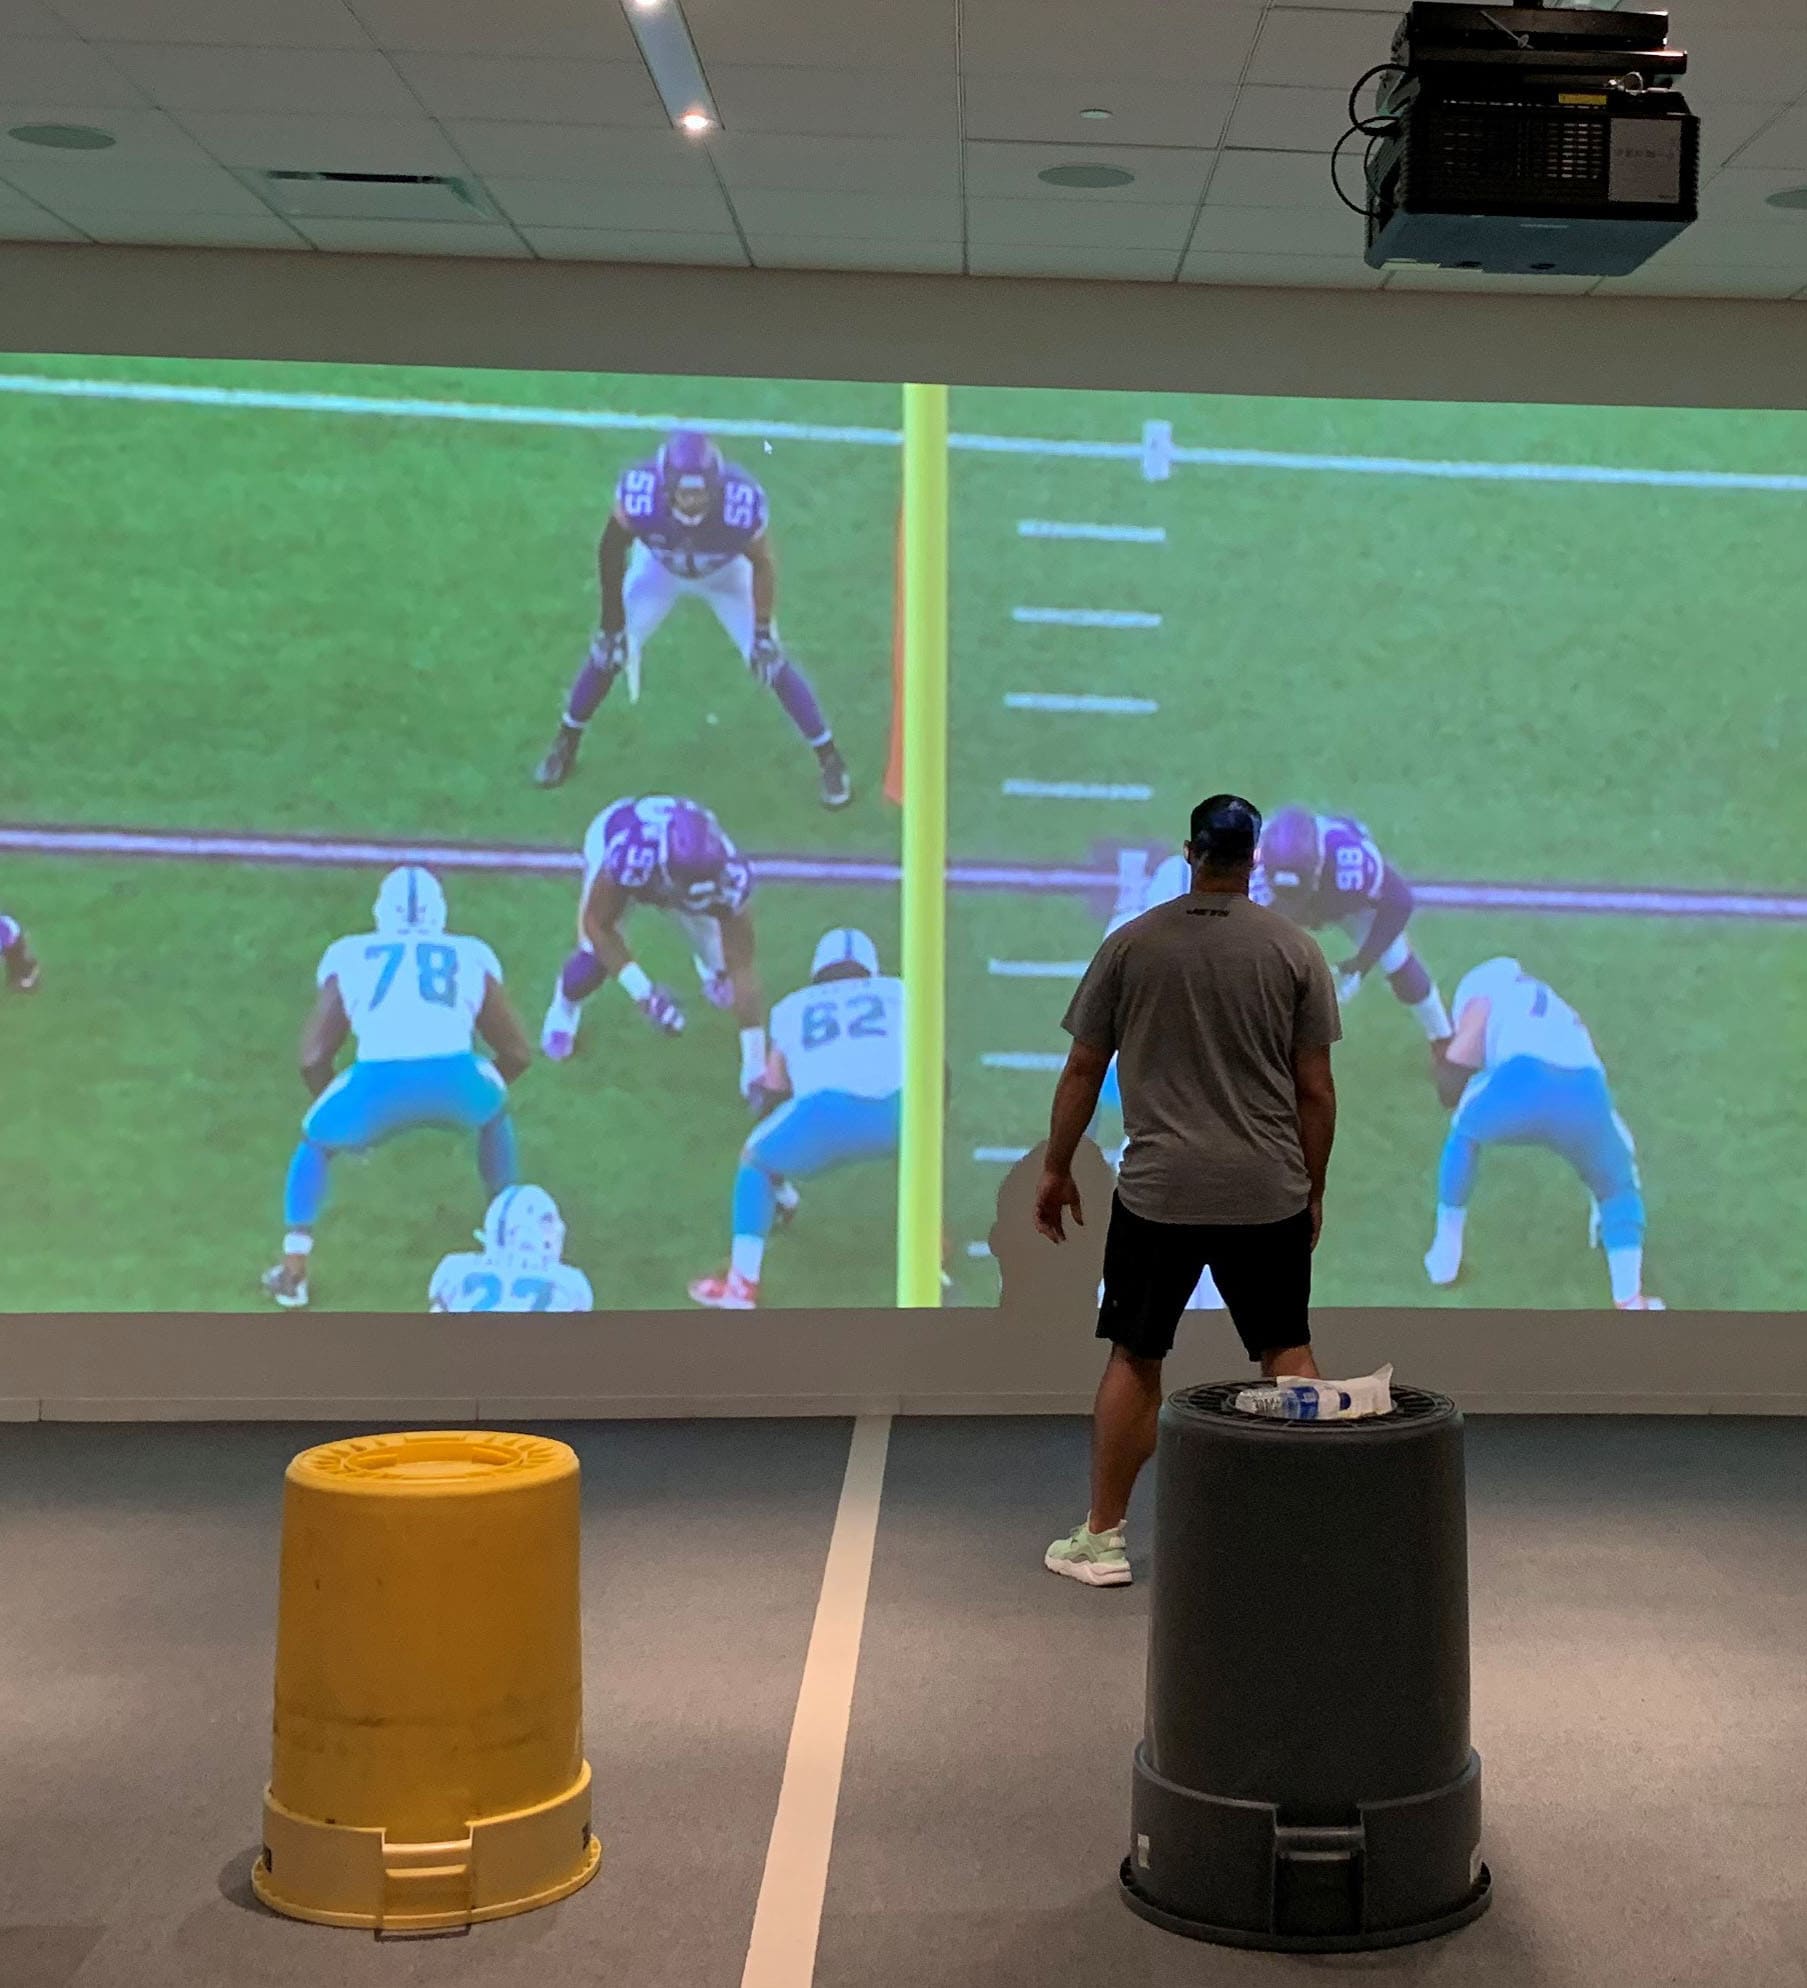 A NY Jets player stands in front of a full-wall video screen with an end zone view of an American football play, showing that the size of the players on the screen matches the size of the player.